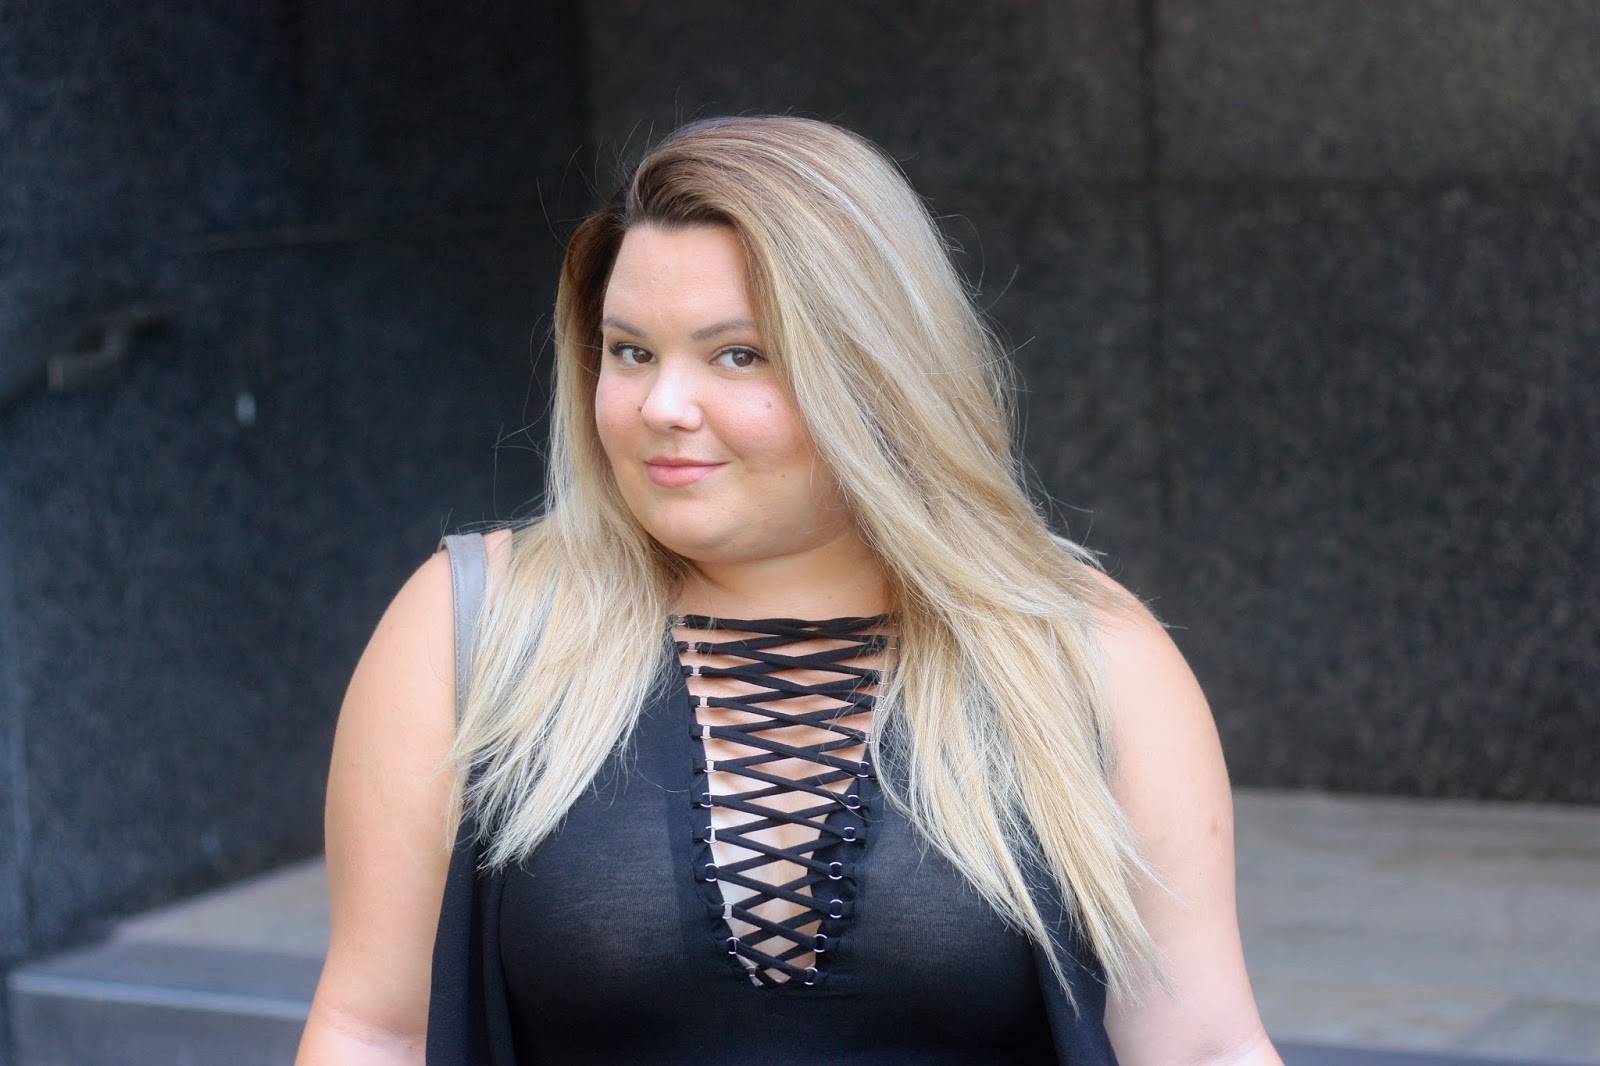 lace up dress, little black dress, plus size fashion, plus size fashion blogger, chicago fashion blogger, natalie craig, natalie in the city, forever 21 plus, forever 21 contemporary, sexy dress, fatshion, curvy blogger